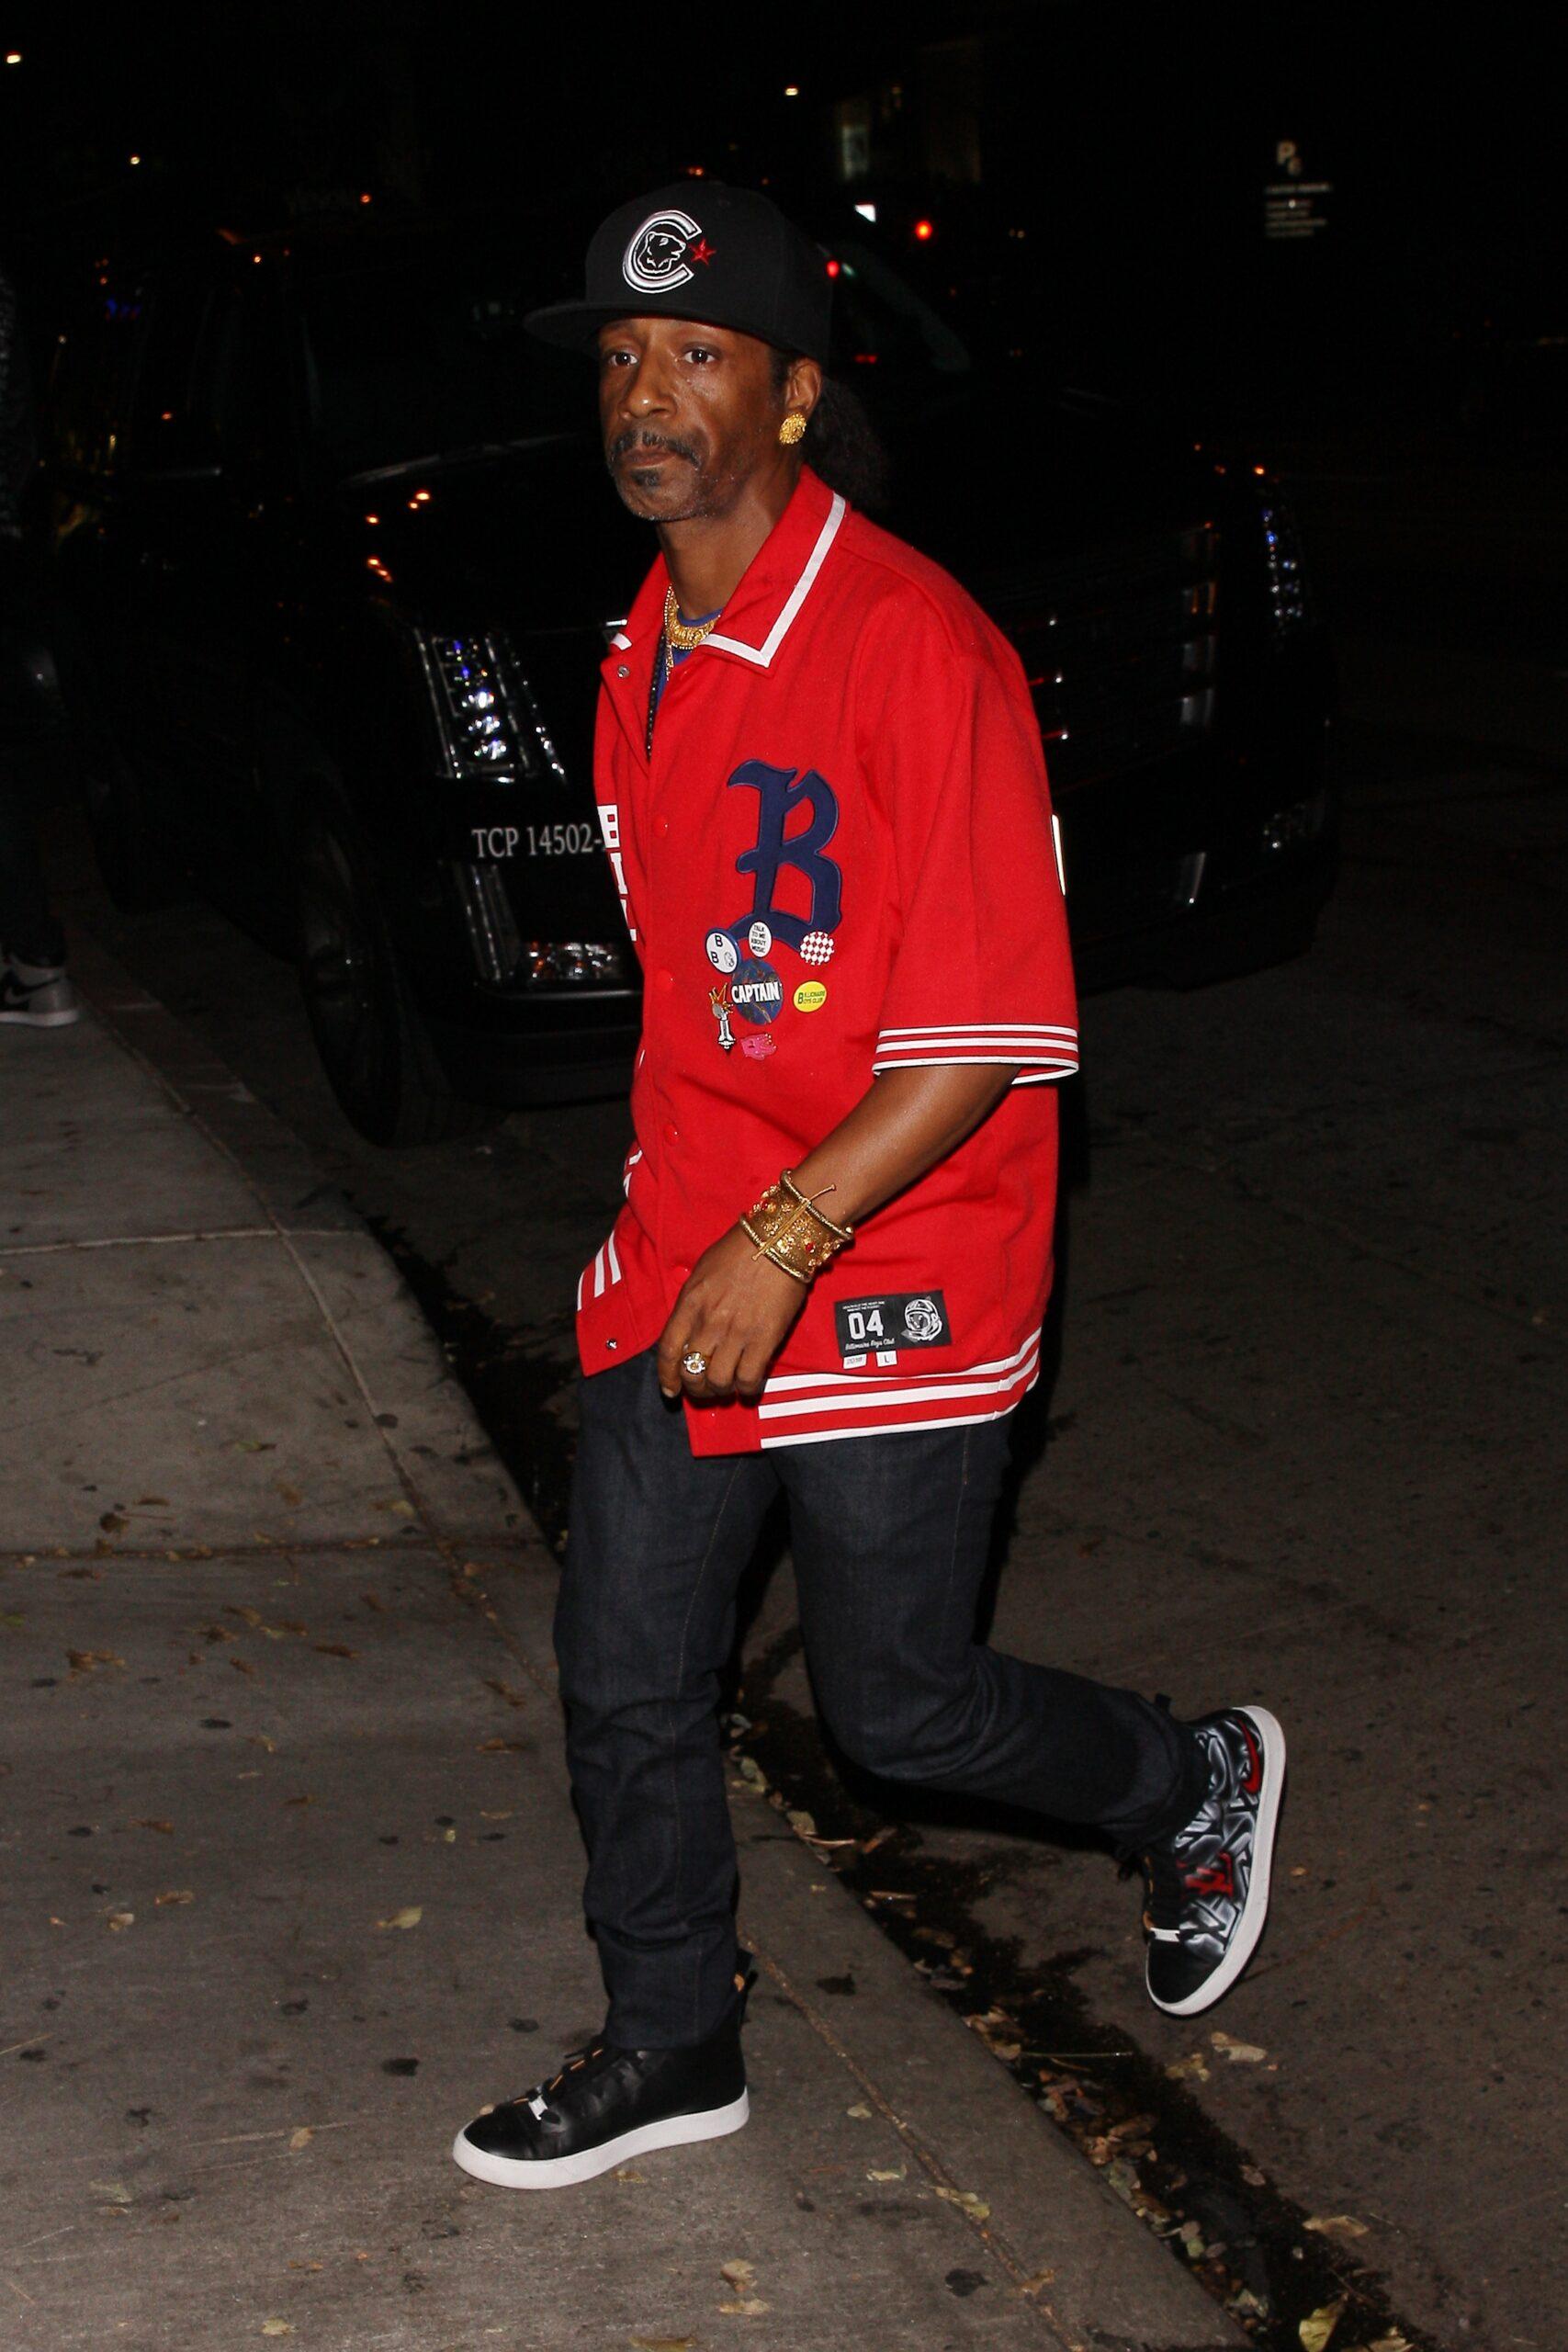 Comedian Katt Williams is spotted leaving the Peppermint club after watching Dave Chappelle perform live on stage